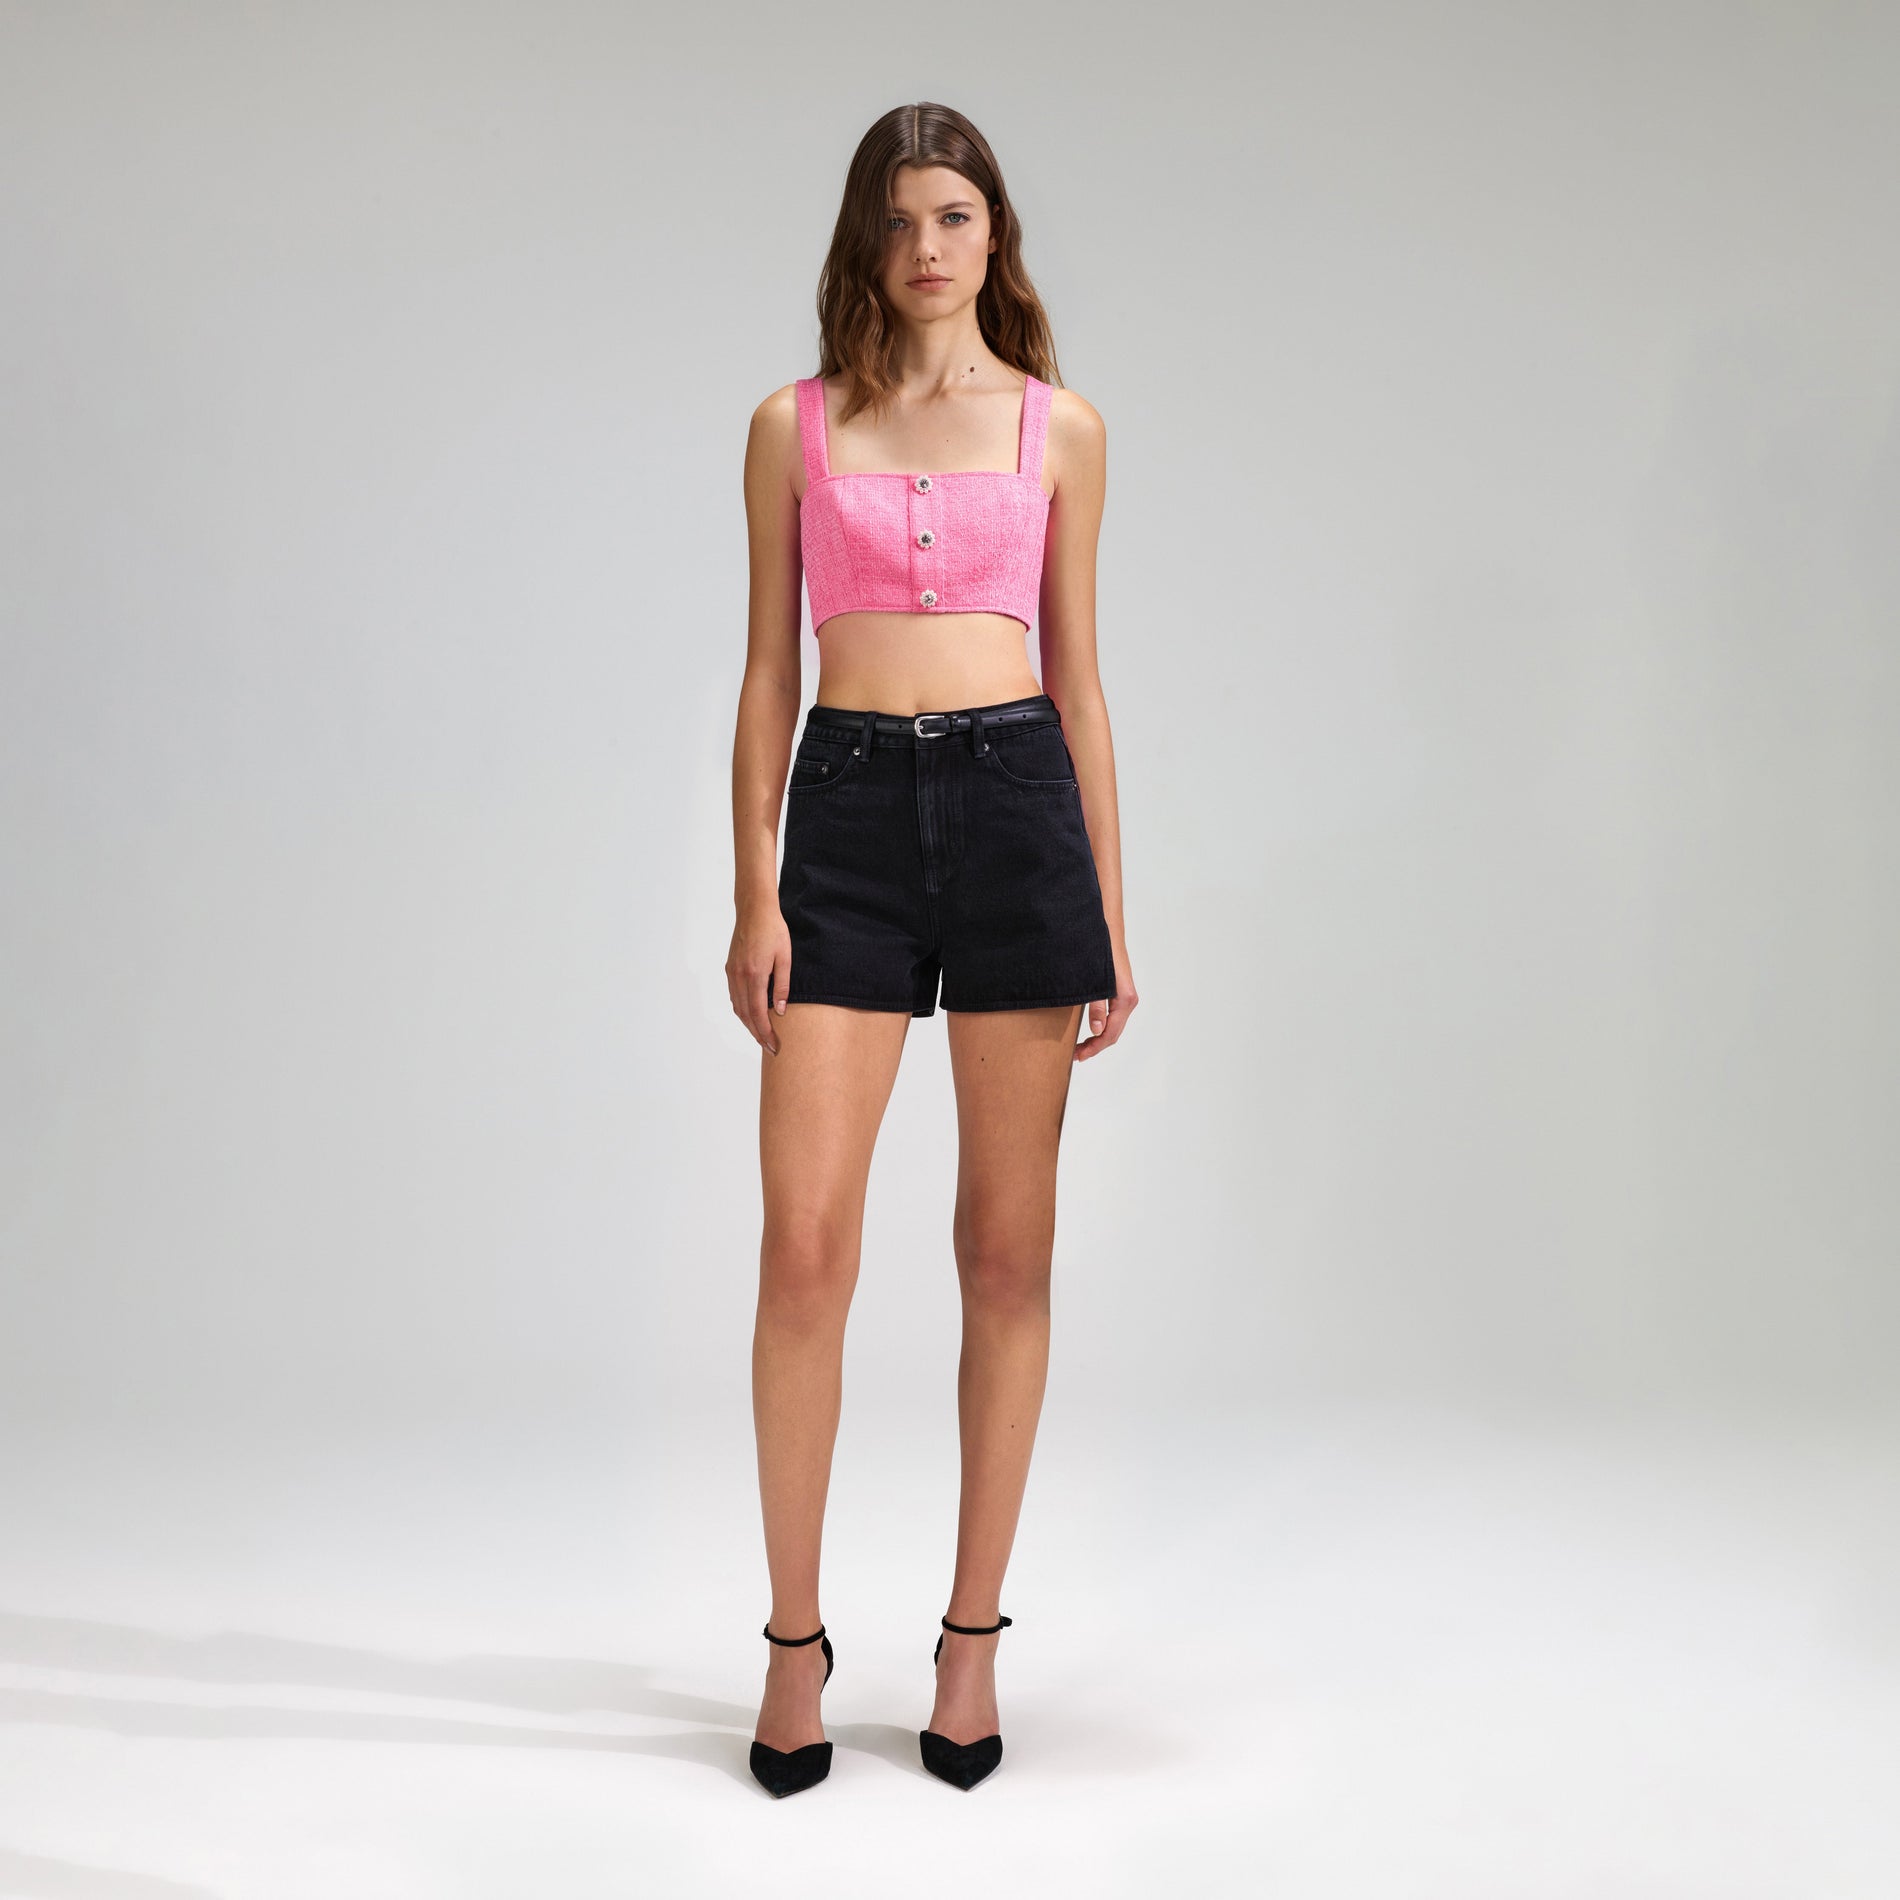 A woman wearing the Pink Boucle Square Neck Crop Top